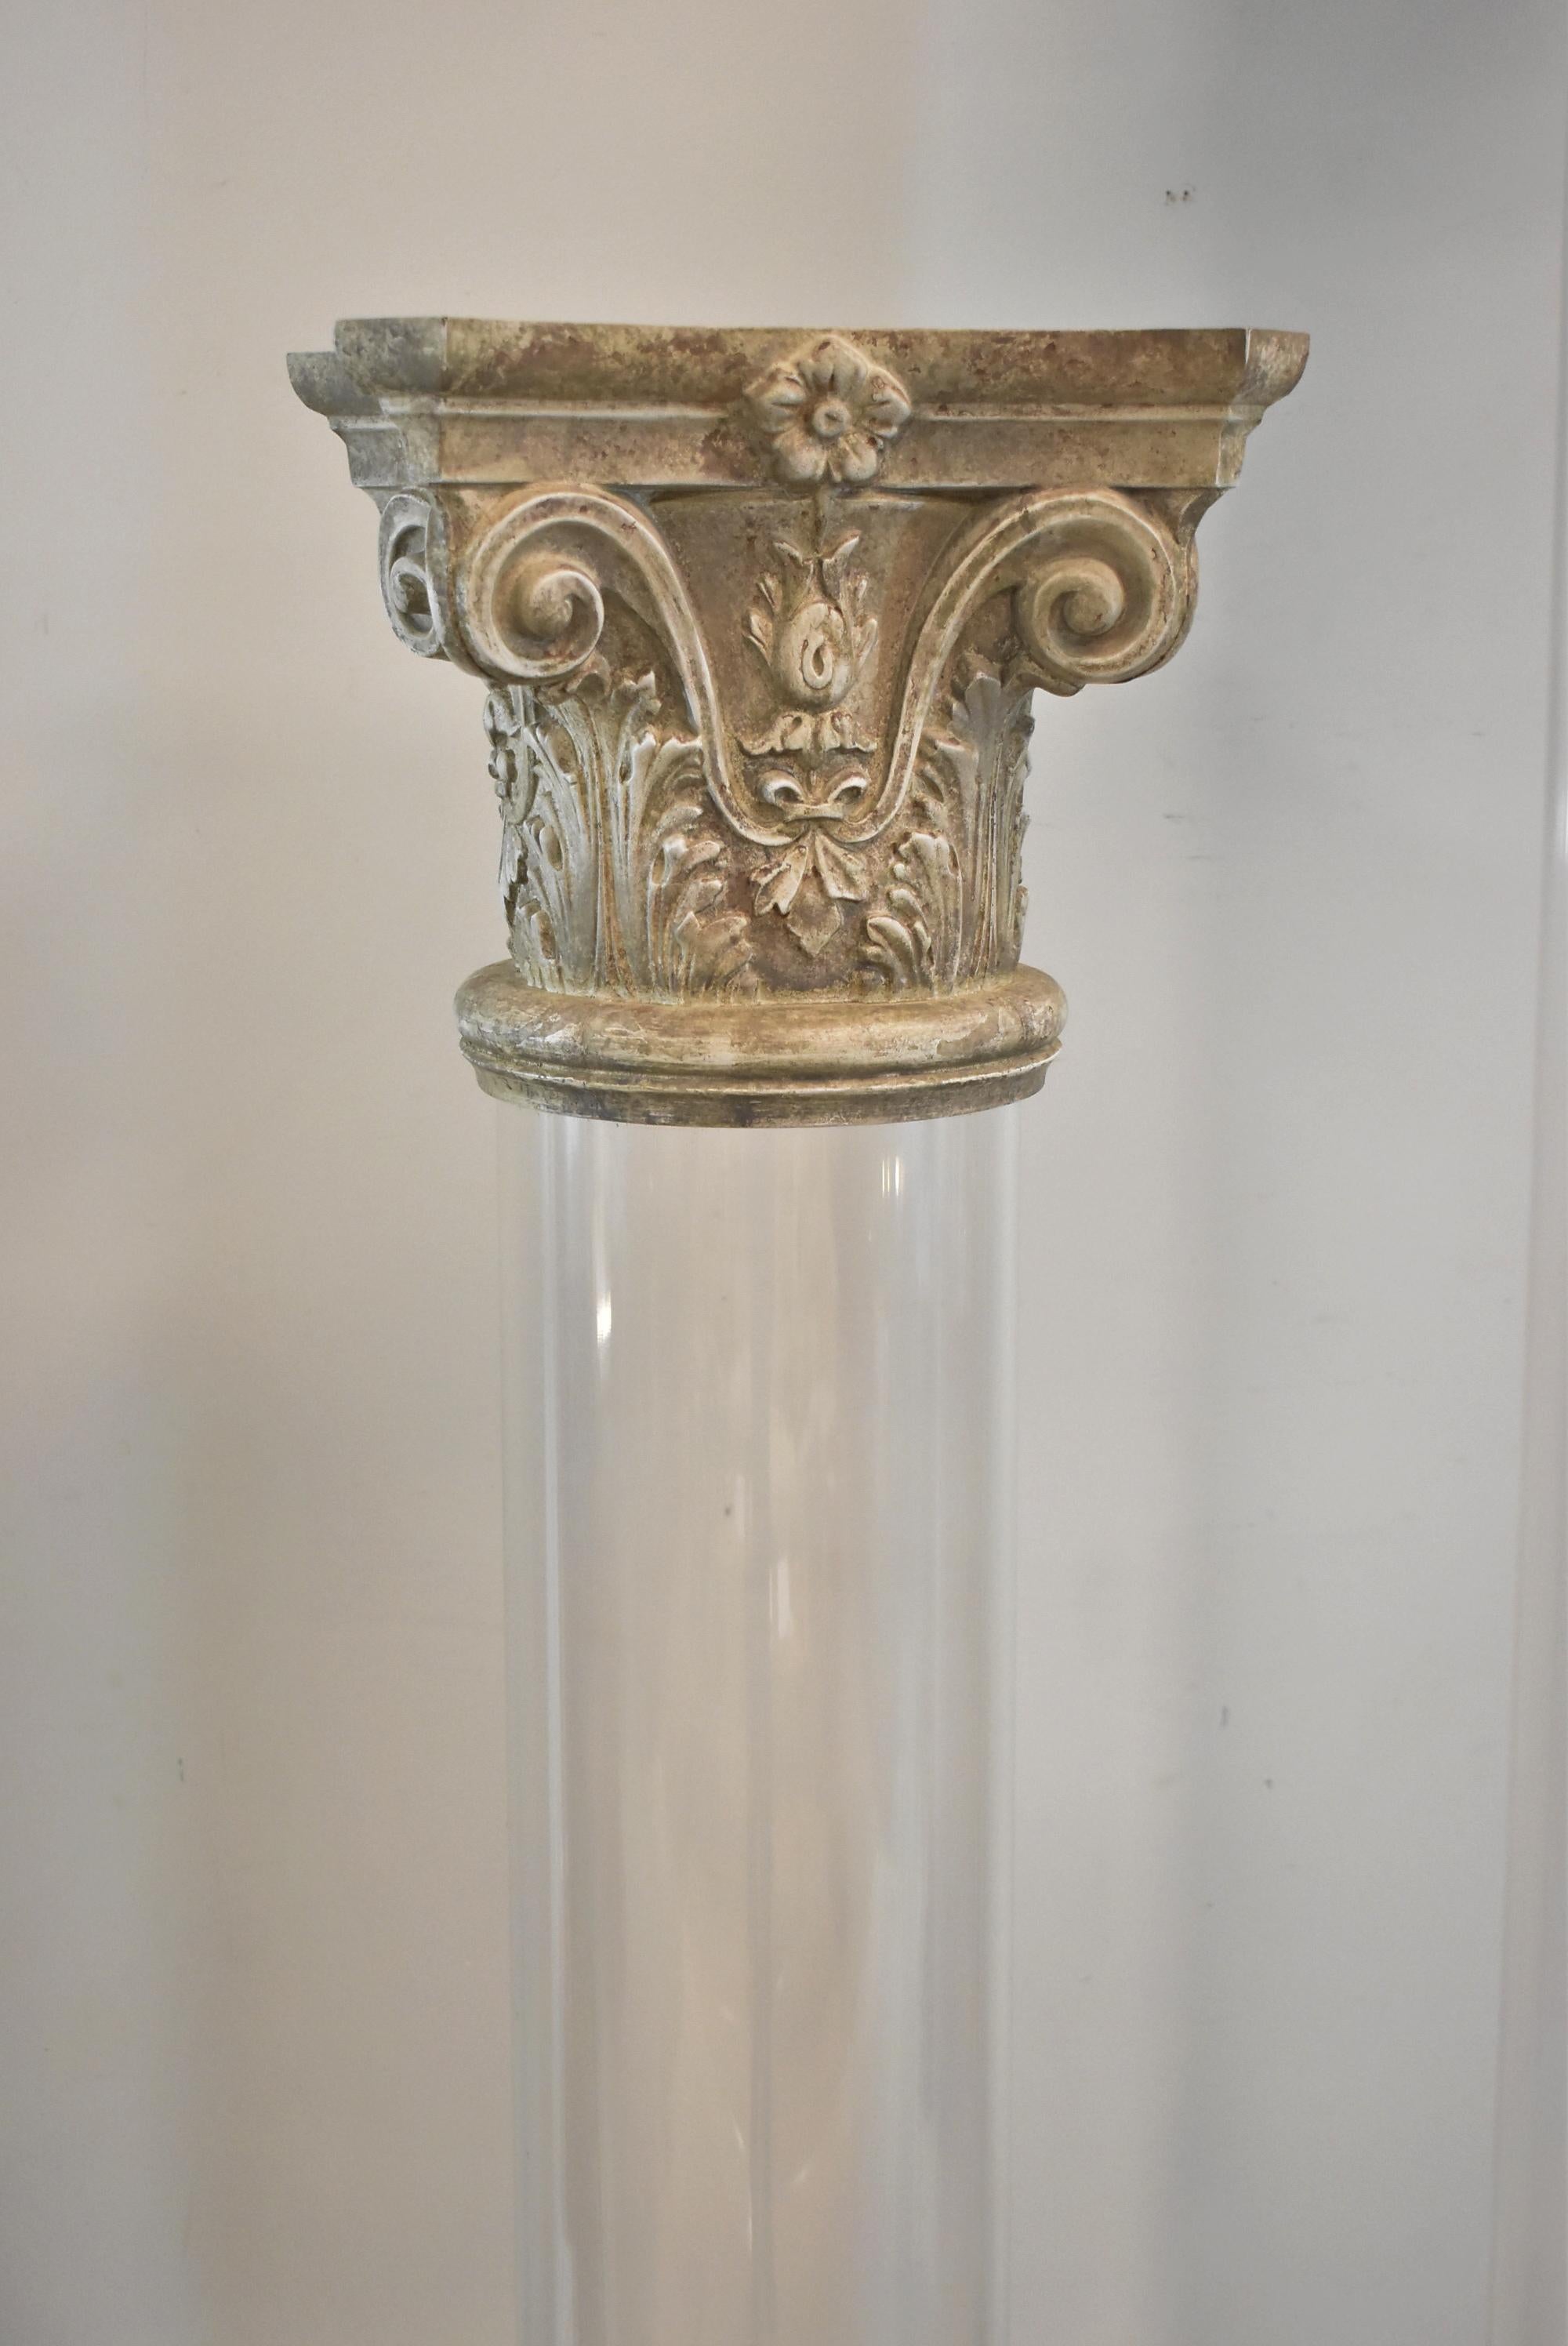 3 Acrylic Pillars with Corinthian tops. A late 20th-century pedestal column made of acrylic and limestone. The base is made of clear acrylic with some scuffing. The top half of the column is ornately and exquisitely carved limestone. The limestone